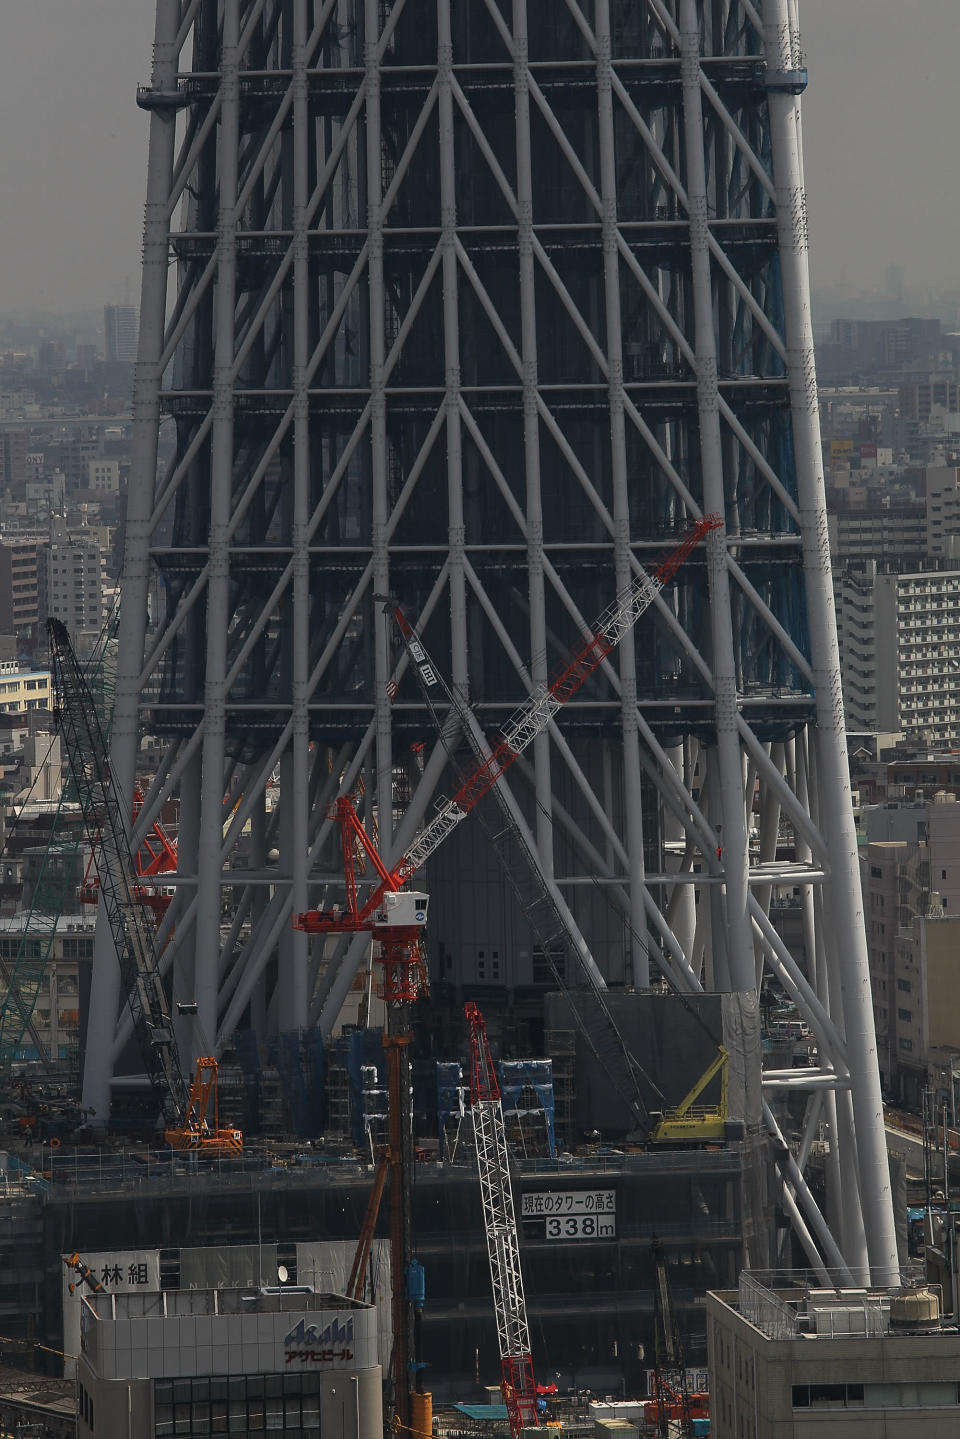 Led by Tobu Railway and a group of six terrestrial broadcasters headed by NHK, the tower project forms the centrepiece of a large commercial development equidistant from Tokyo Skytree and Oshiage train stations, 7 km (4.3 mi) north-east of Tokyo station. (Photo by Koichi Kamoshida/Getty Images)